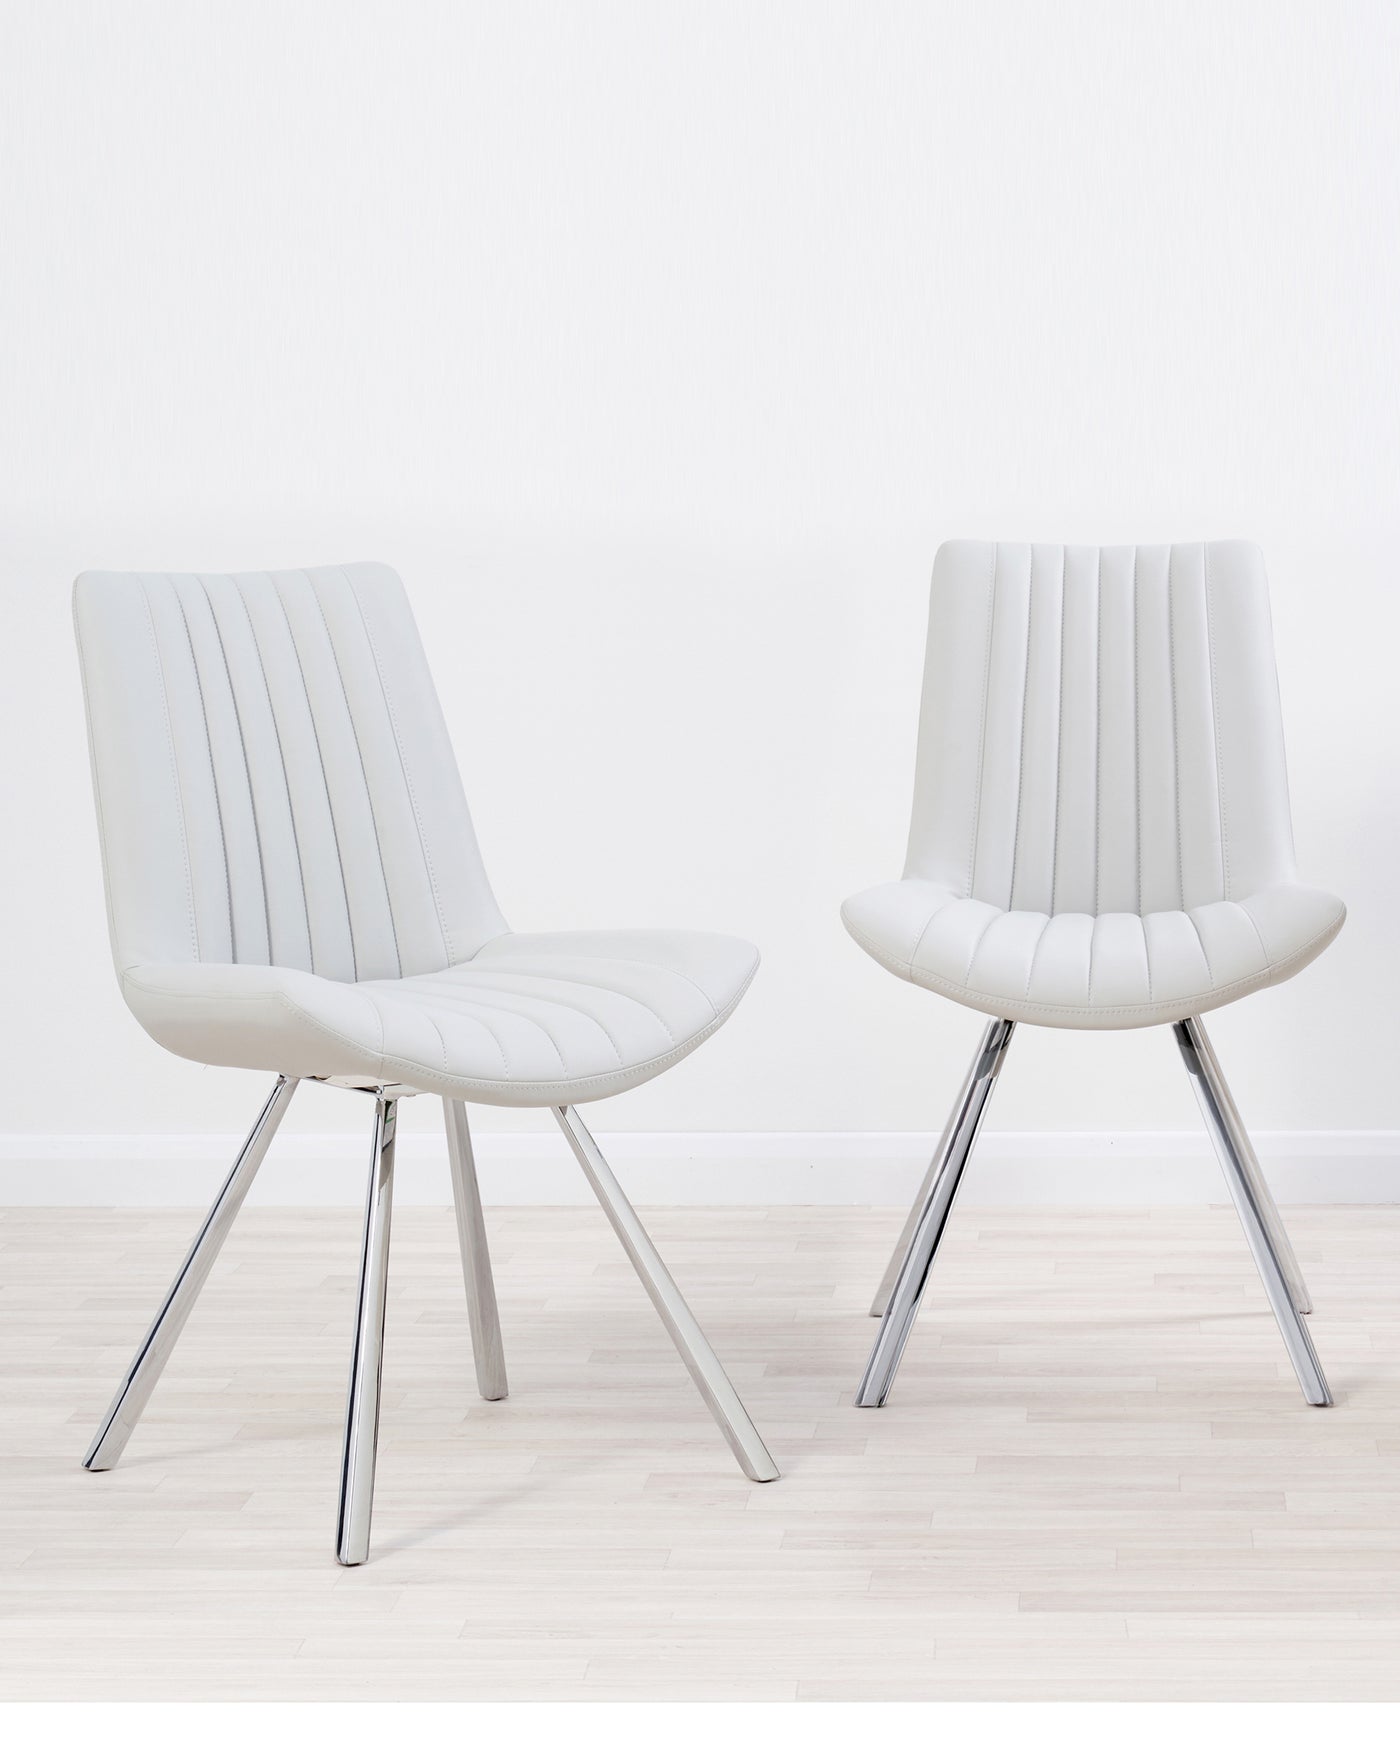 Two modern white leather dining chairs with vertical stitching and sleek chrome legs on a light wooden floor with a white background.